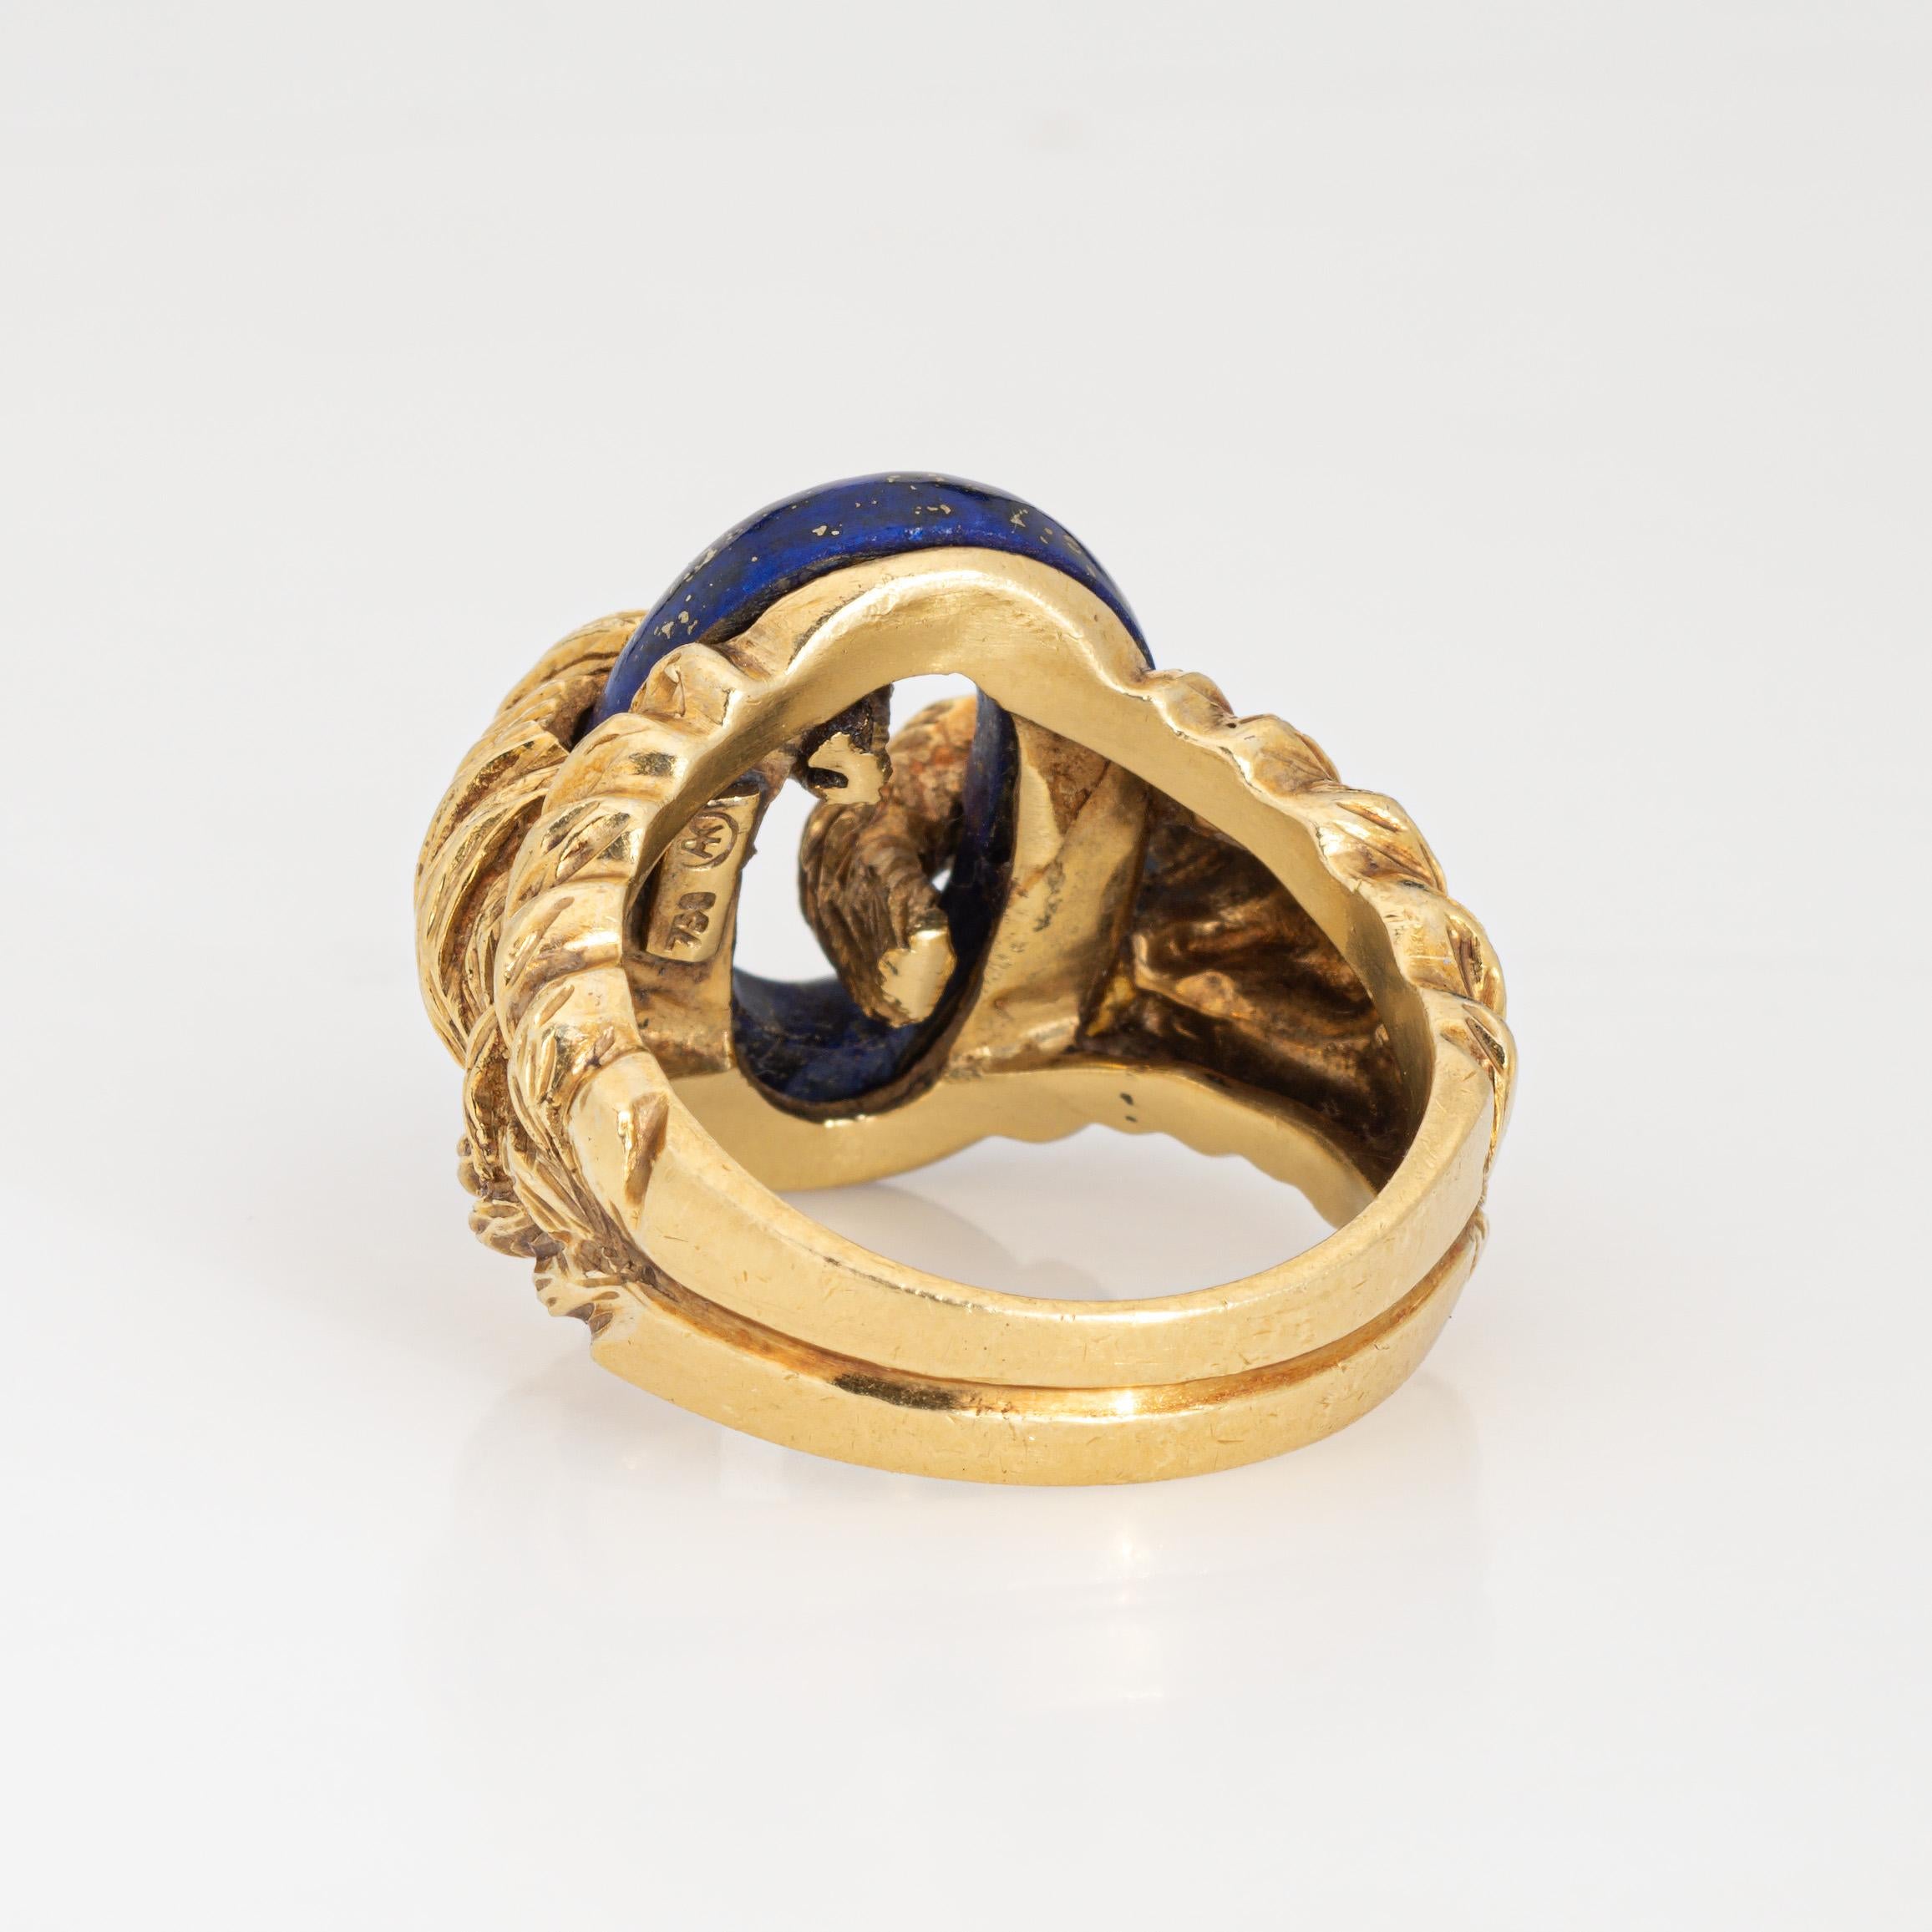 70s Lapis Lazuli Ring Oval Vintage 18k Yellow Gold Sz 6.75 Fine Estate Jewelry  In Good Condition For Sale In Torrance, CA